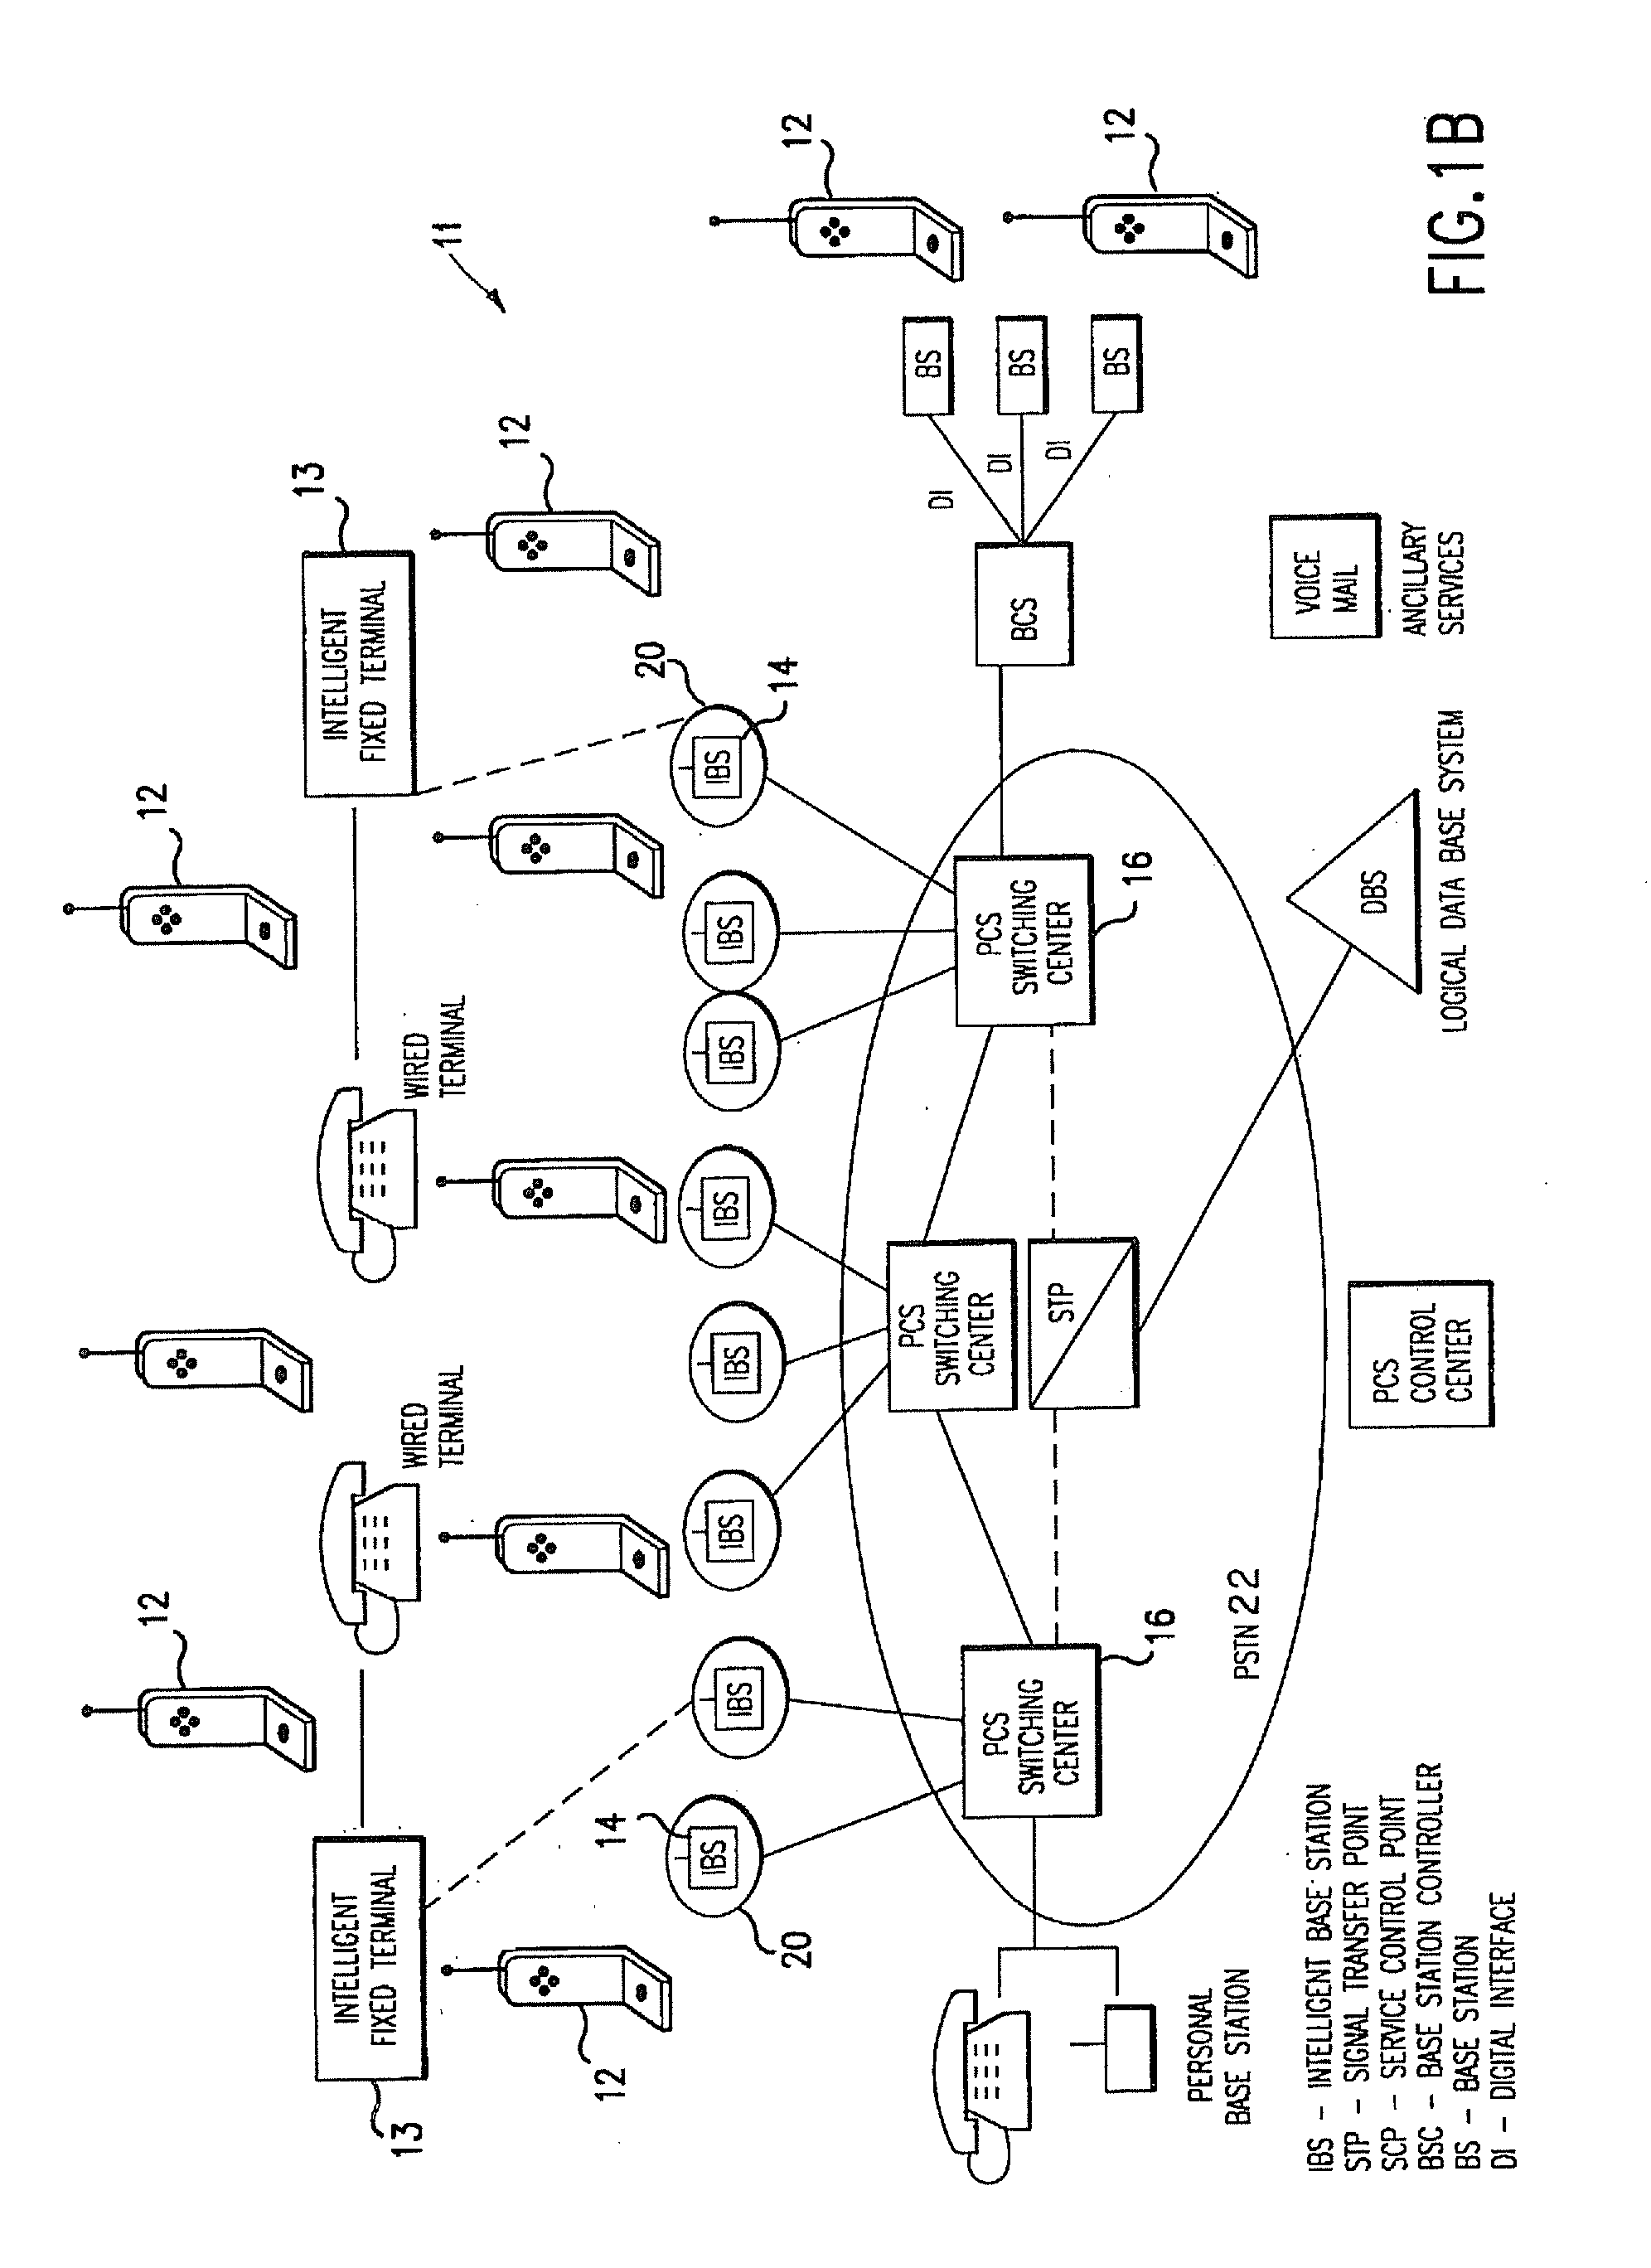 Wireless Digital Personal Communications System Having Voice/Data/Image Two-Way Calling and Intercell Hand-Off Provided Through Distributed Logic Resident in Portable Handset Terminals, Fixed Terminals, Radio Cell Base Stations and Switched Telephone Network